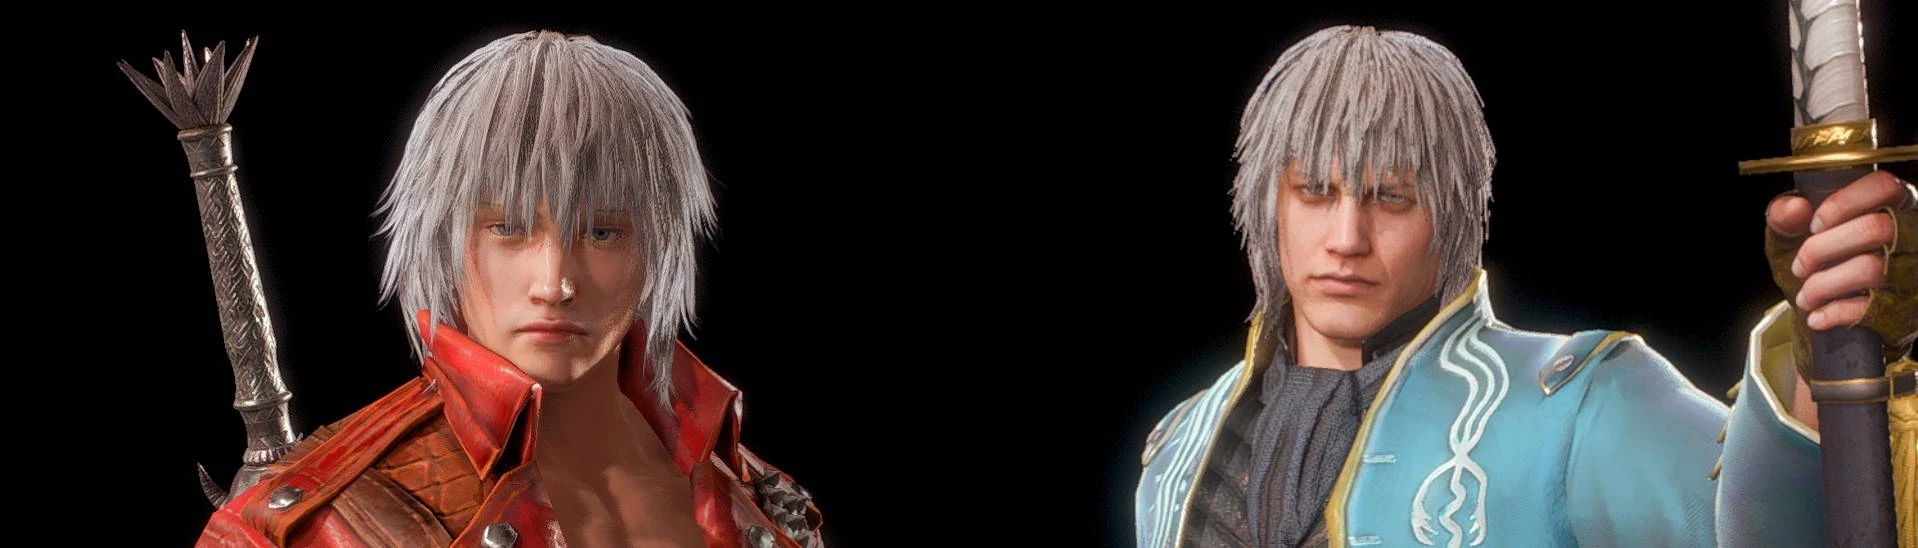 Is it just me or Nero looks better with his new hairstyle compared to his  old hairstyle? : r/DevilMayCry